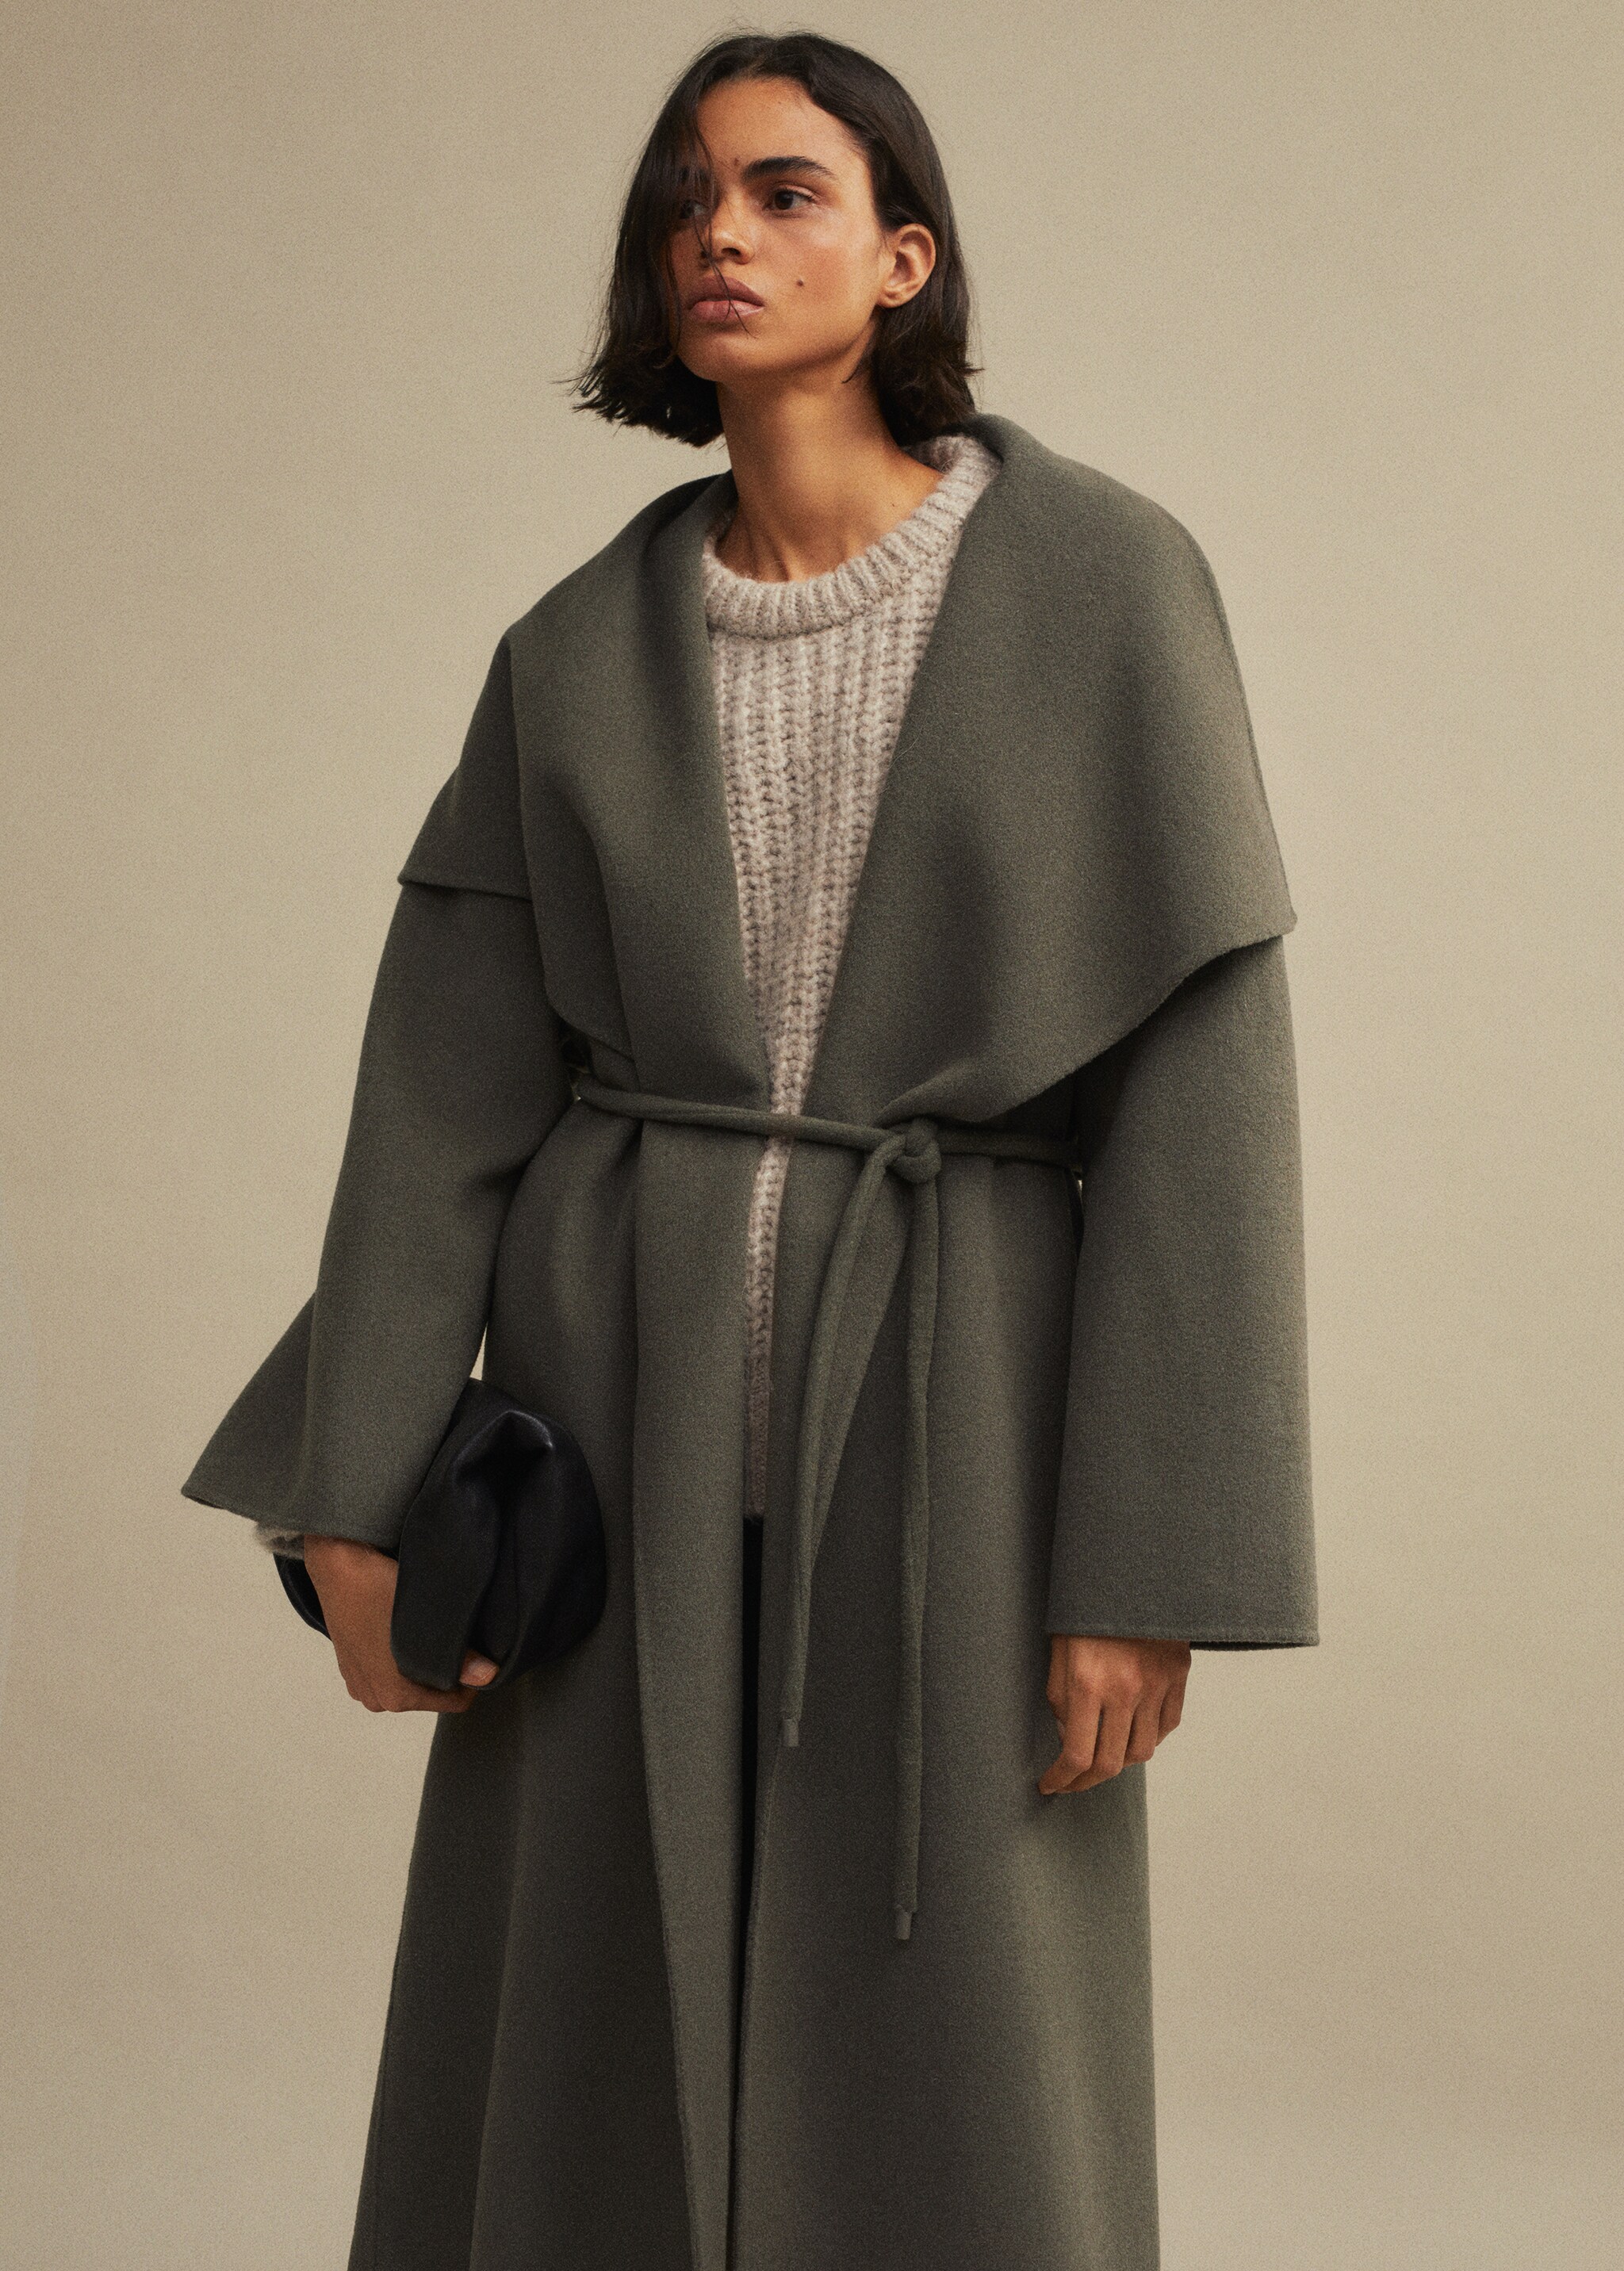 Handmade wool coat - Details of the article 4